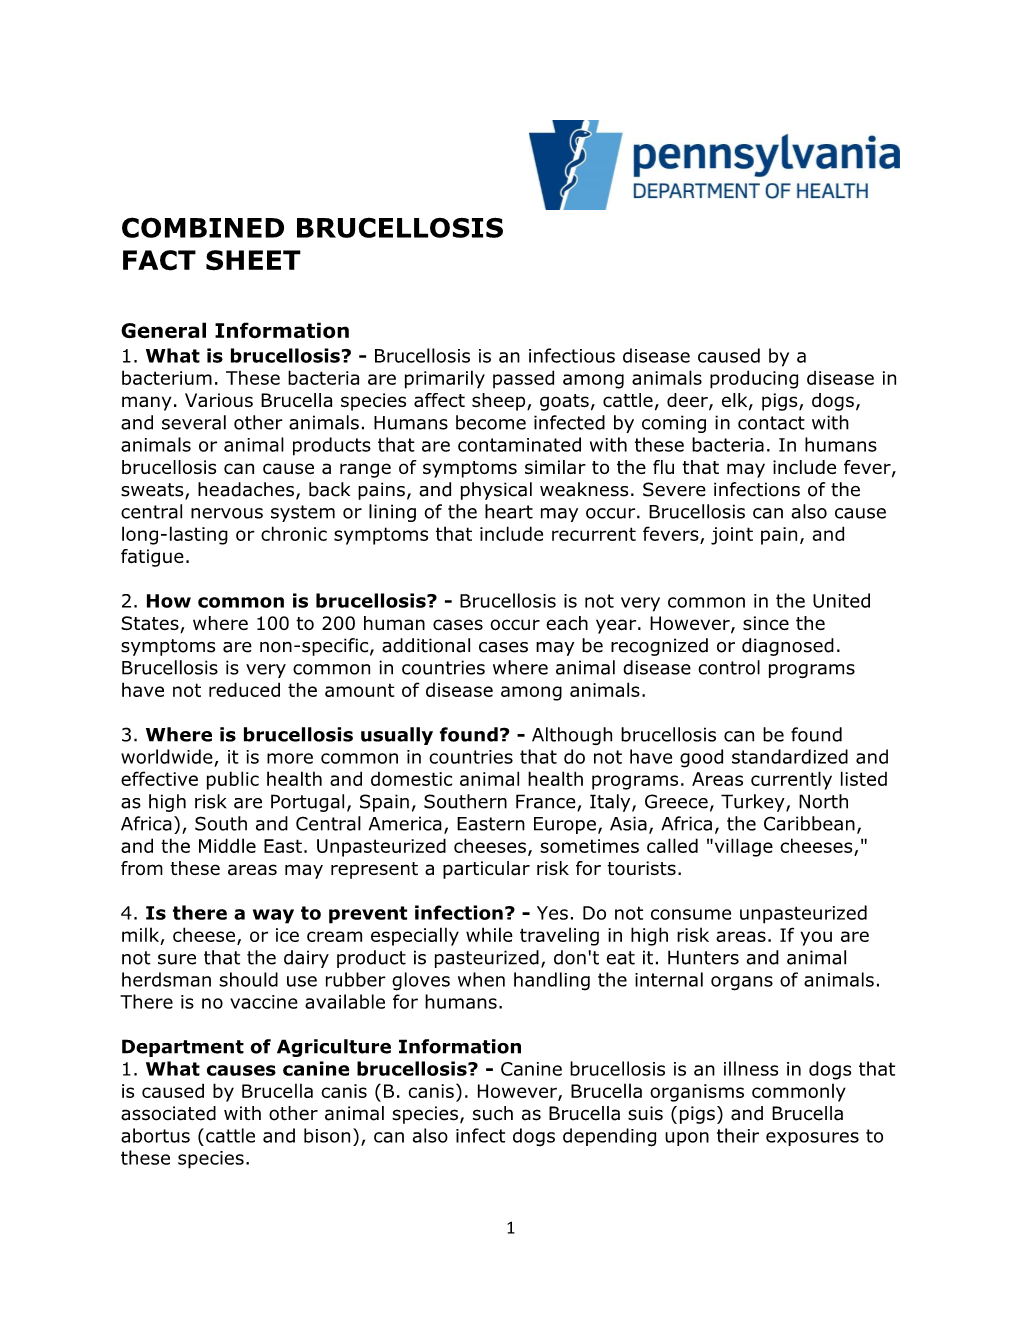 Combined Brucellosis Fact Sheet